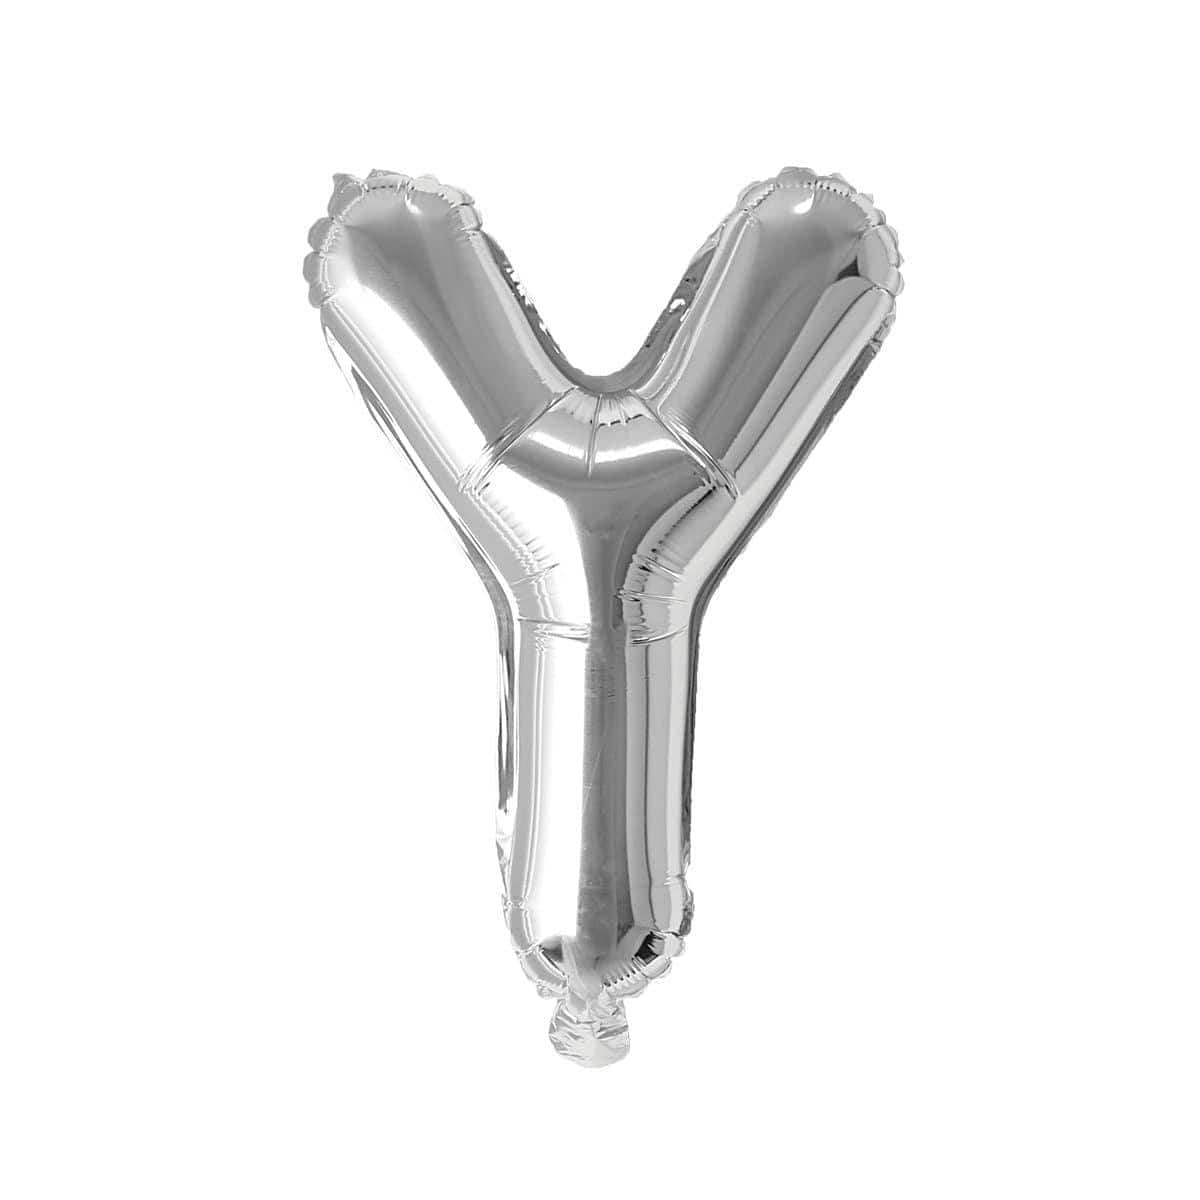 Buy Balloons Silver Letter Y Foil Balloon, 16 Inches sold at Party Expert